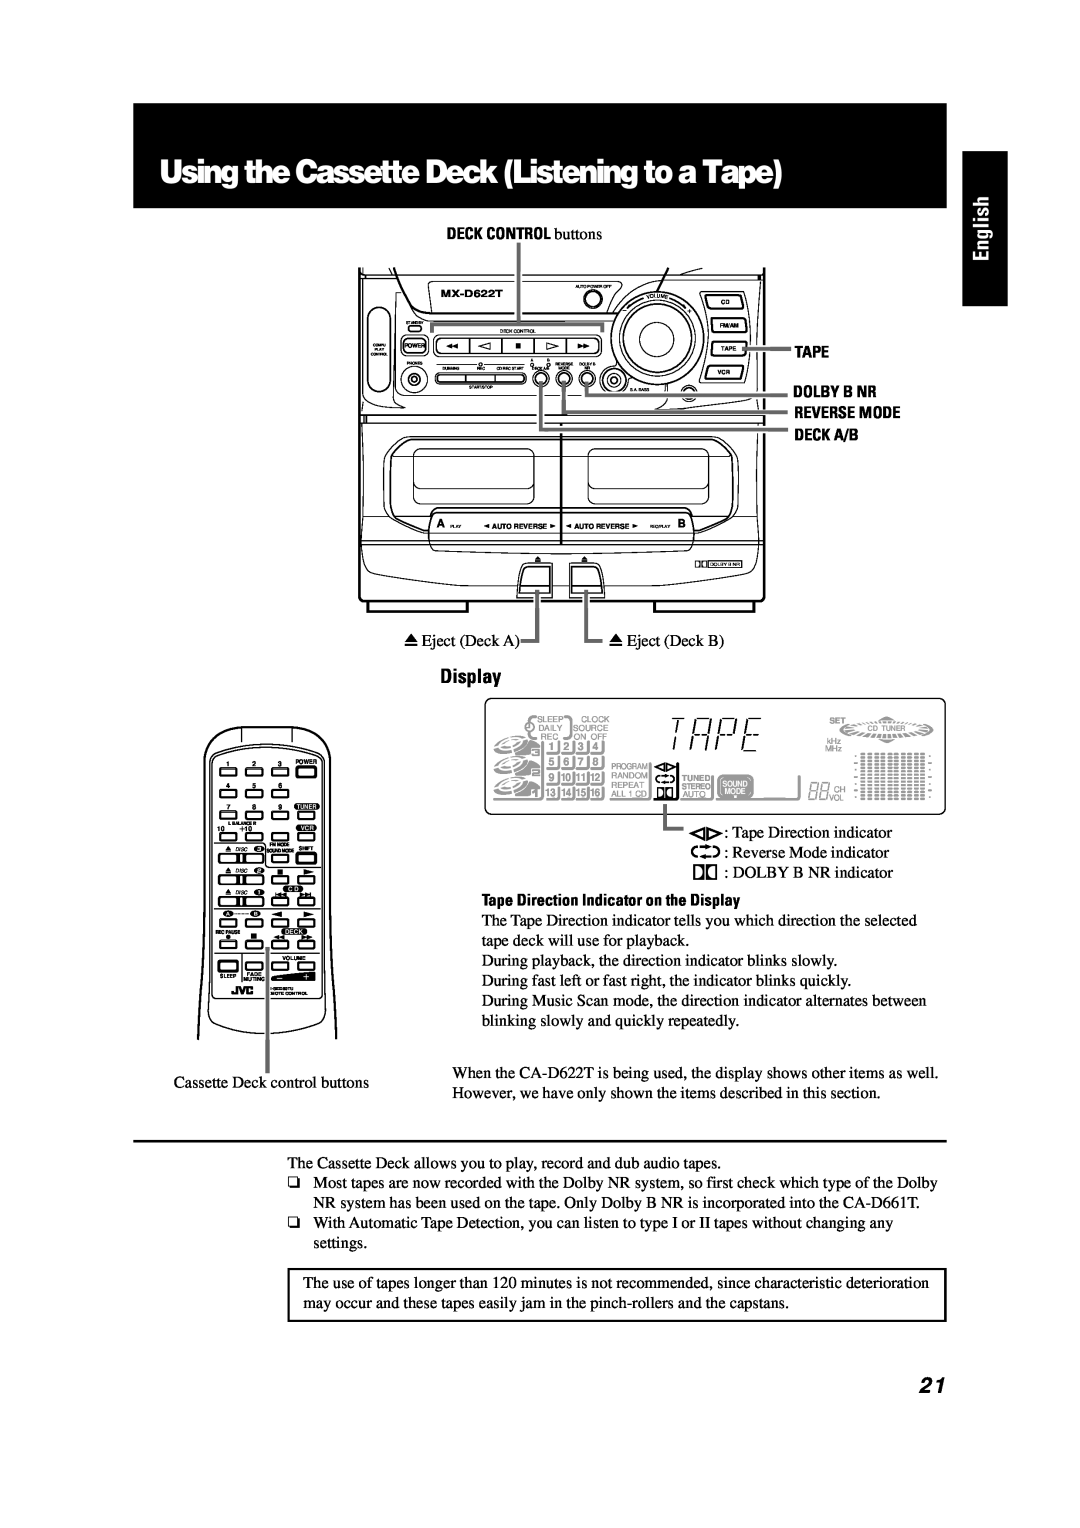 JVC GVT0001-002A manual Using the Cassette Deck Listening to a Tape, English, Display, DECK CONTROL buttons, Deck A/B 